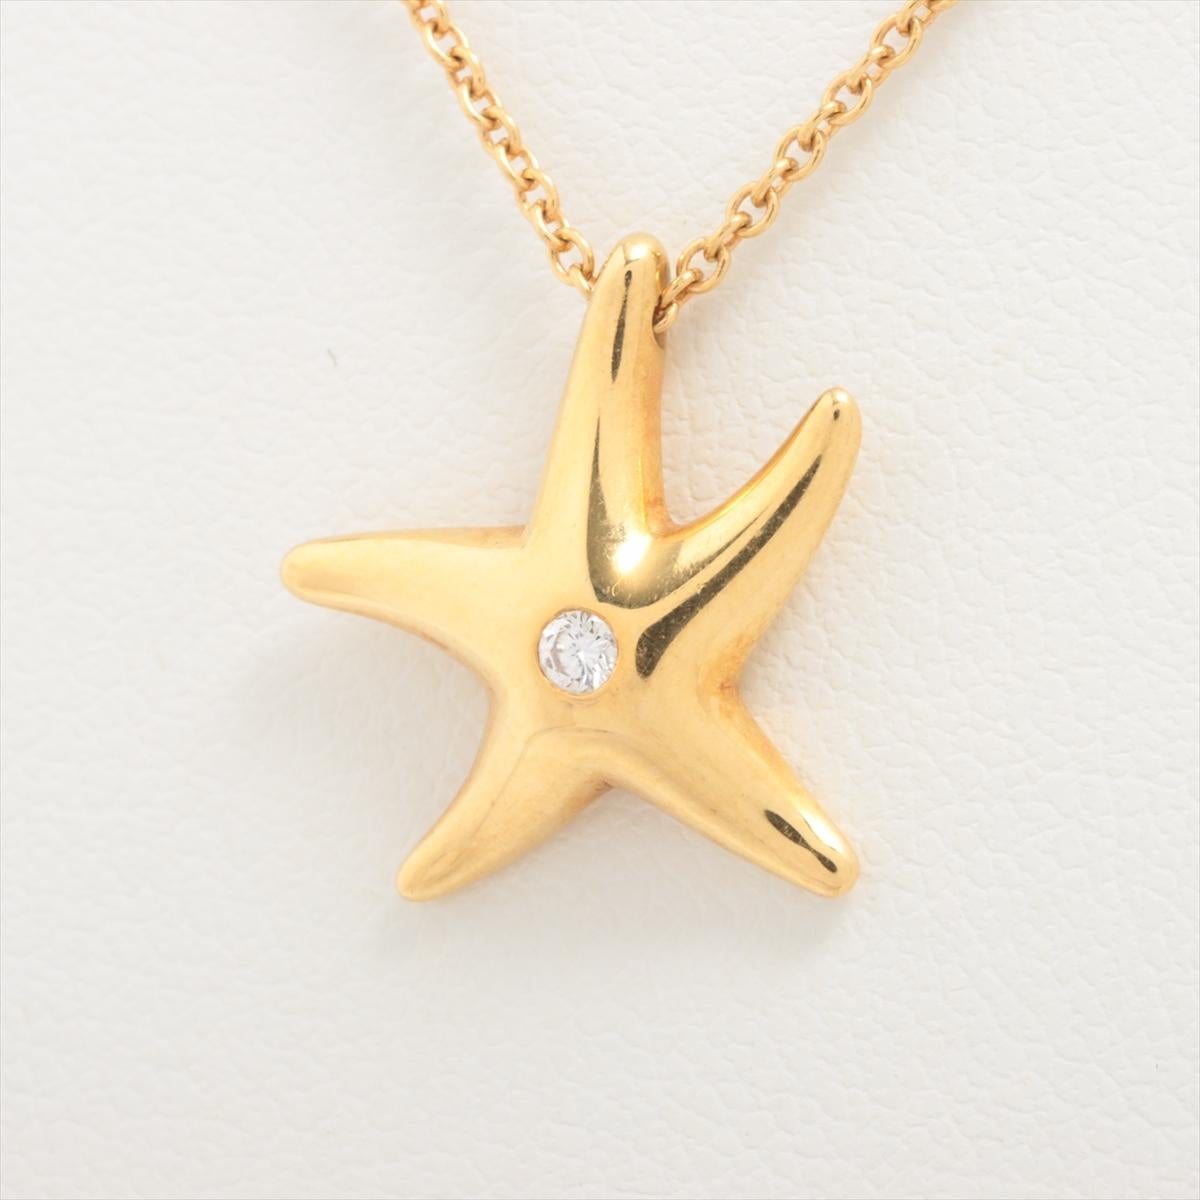 The Tiffany & Co. Starfish Diamond Pendant Necklace in Gold a captivating and elegant accessory that evokes the beauty of the sea. Meticulously crafted by Tiffany & Co., the necklace features a delicate starfish pendant adorned with a single